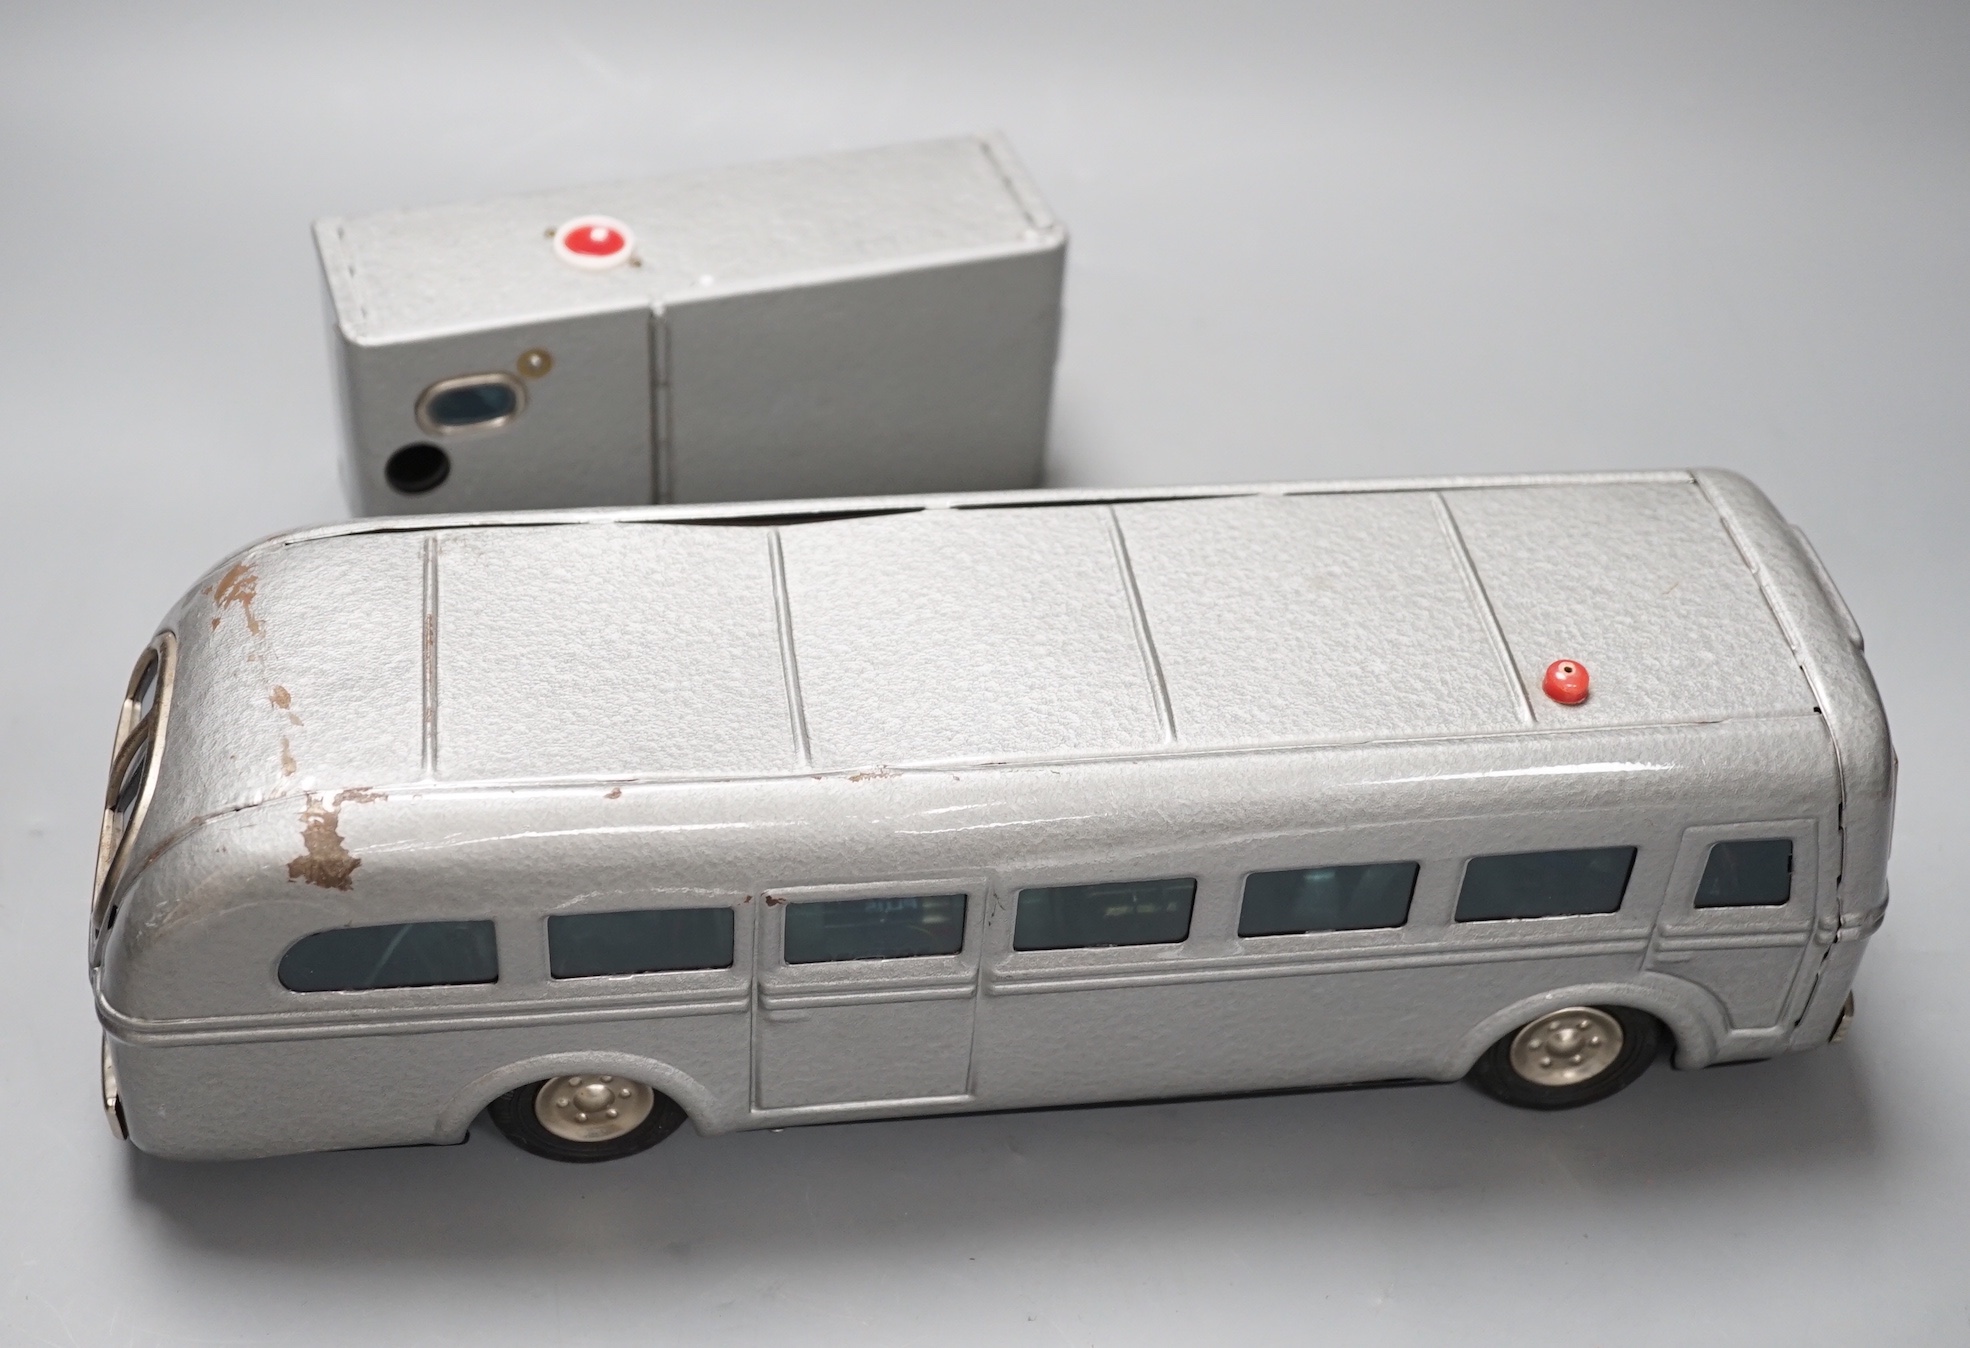 A 1950s Japanese Modern Toys Radicon radio controlled model bus, incomplete